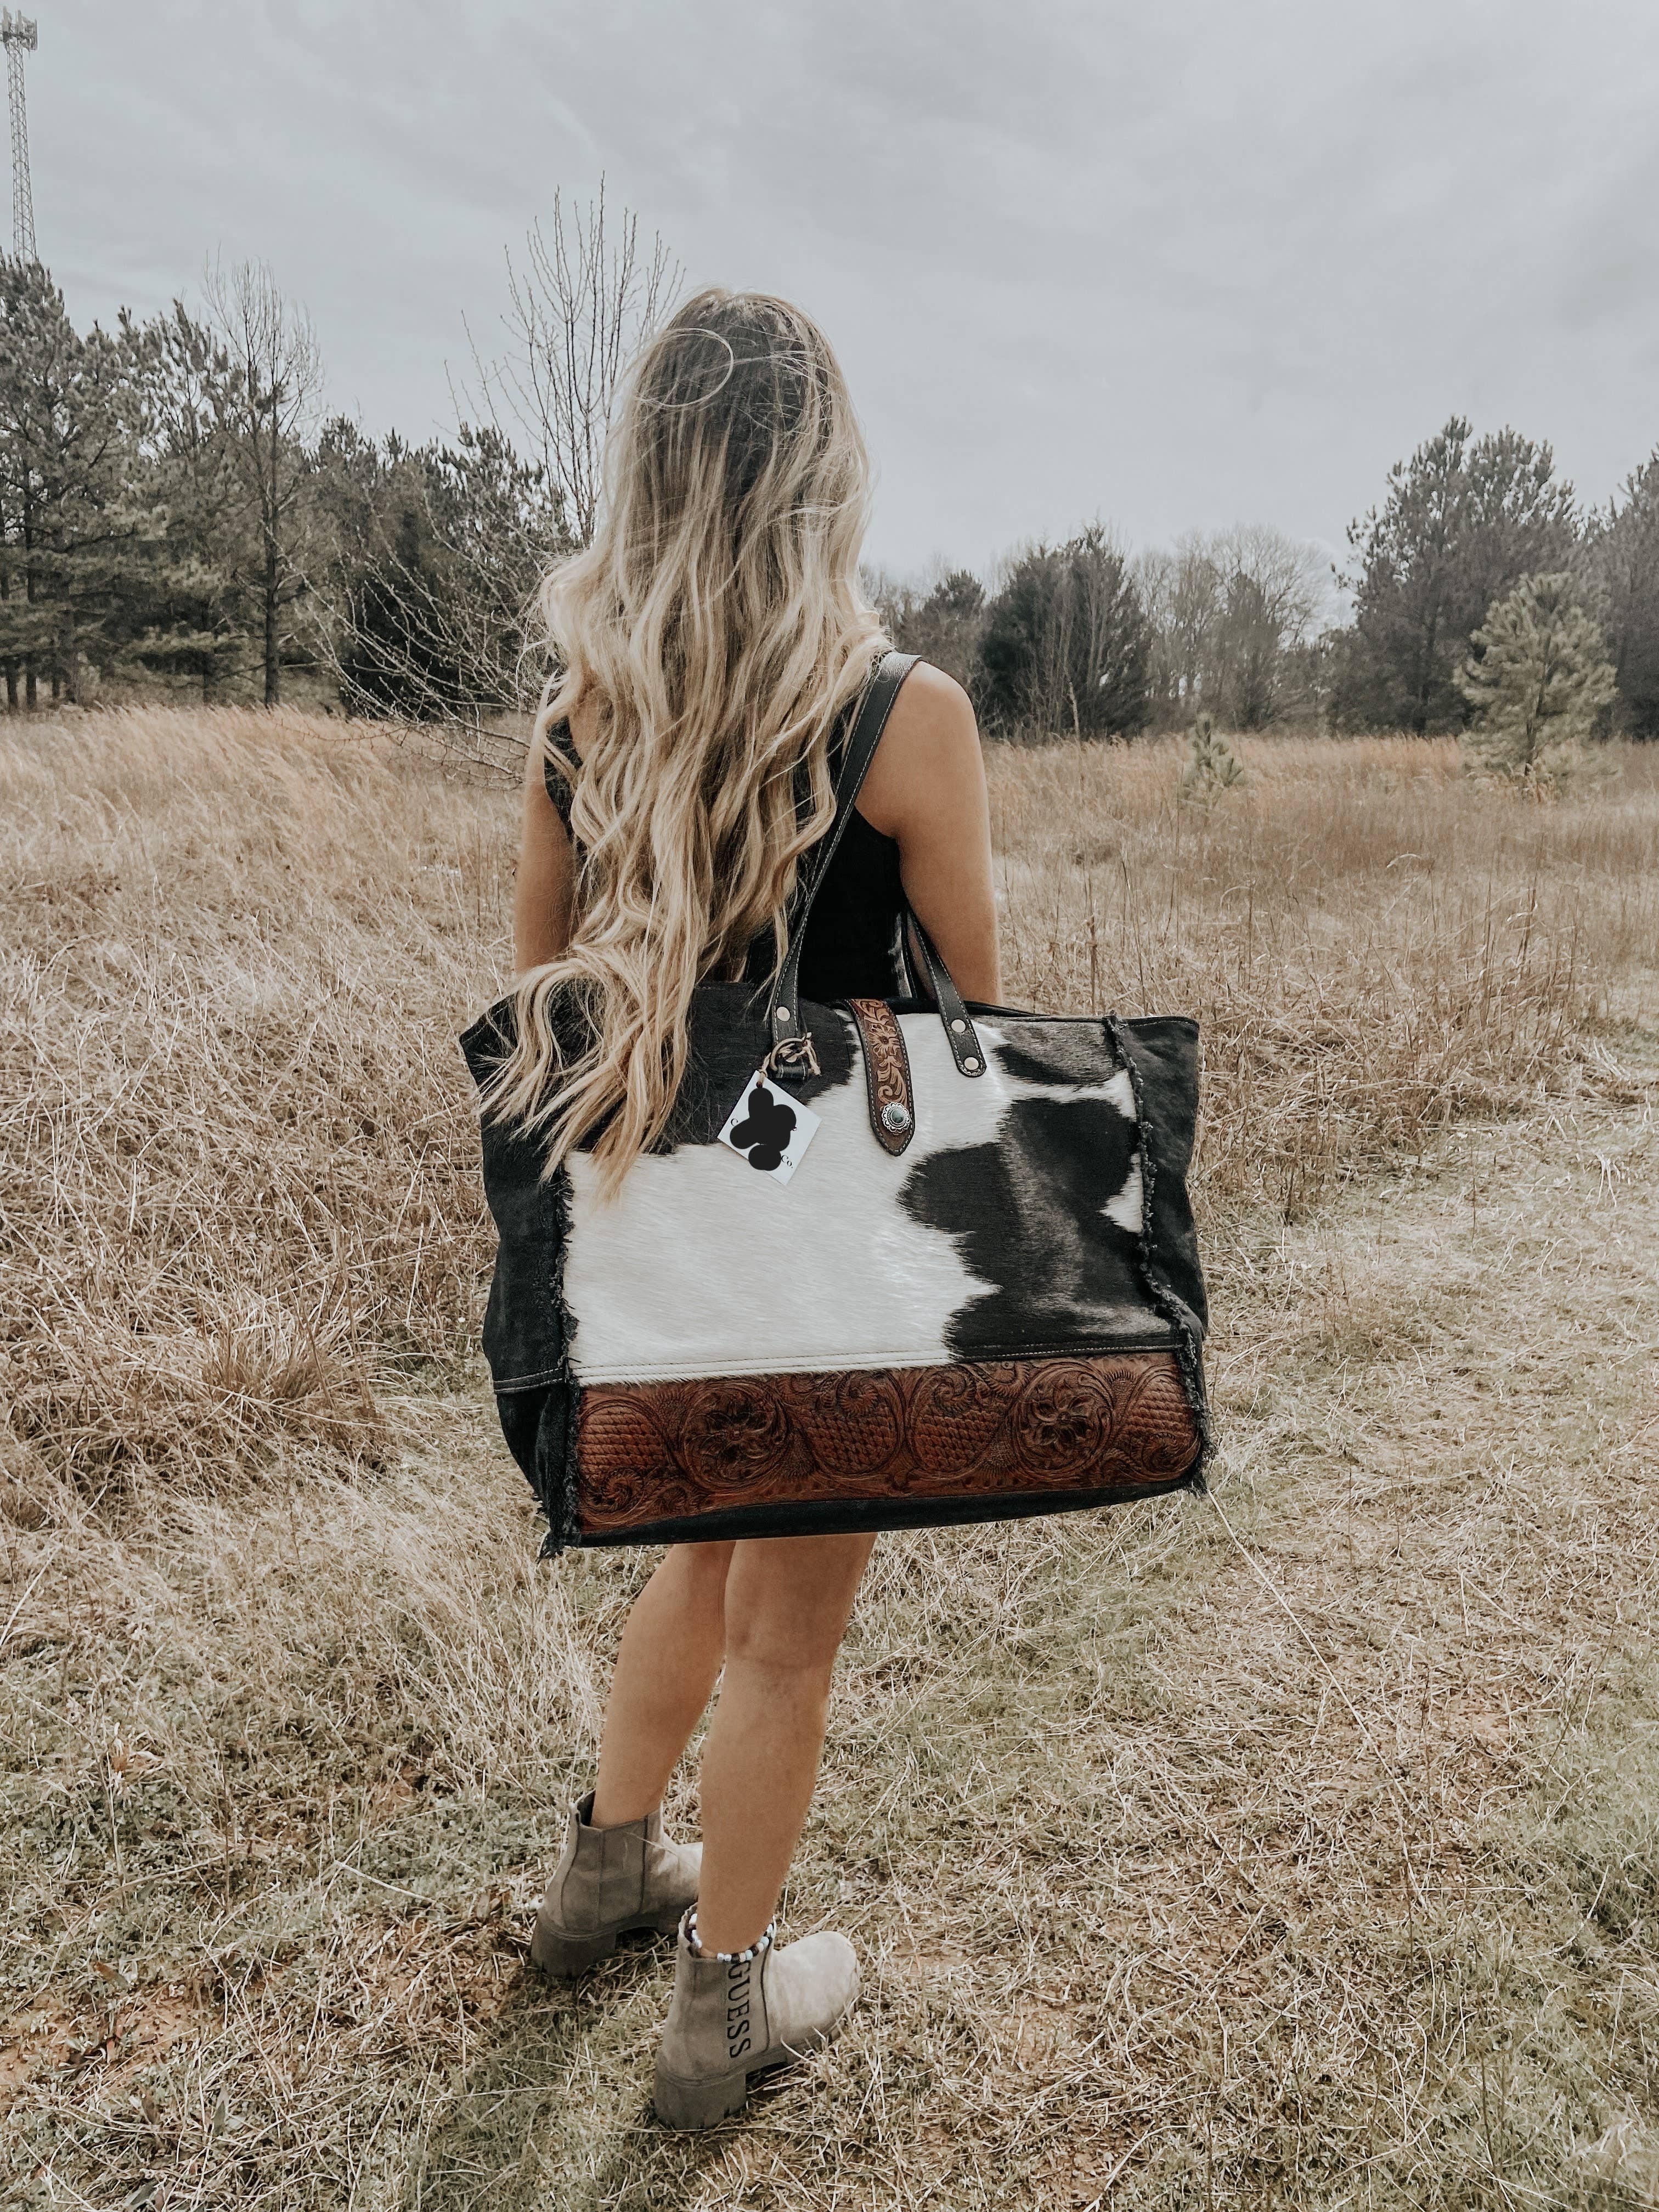 Texas Western Cowhide Bags and More wholesale products